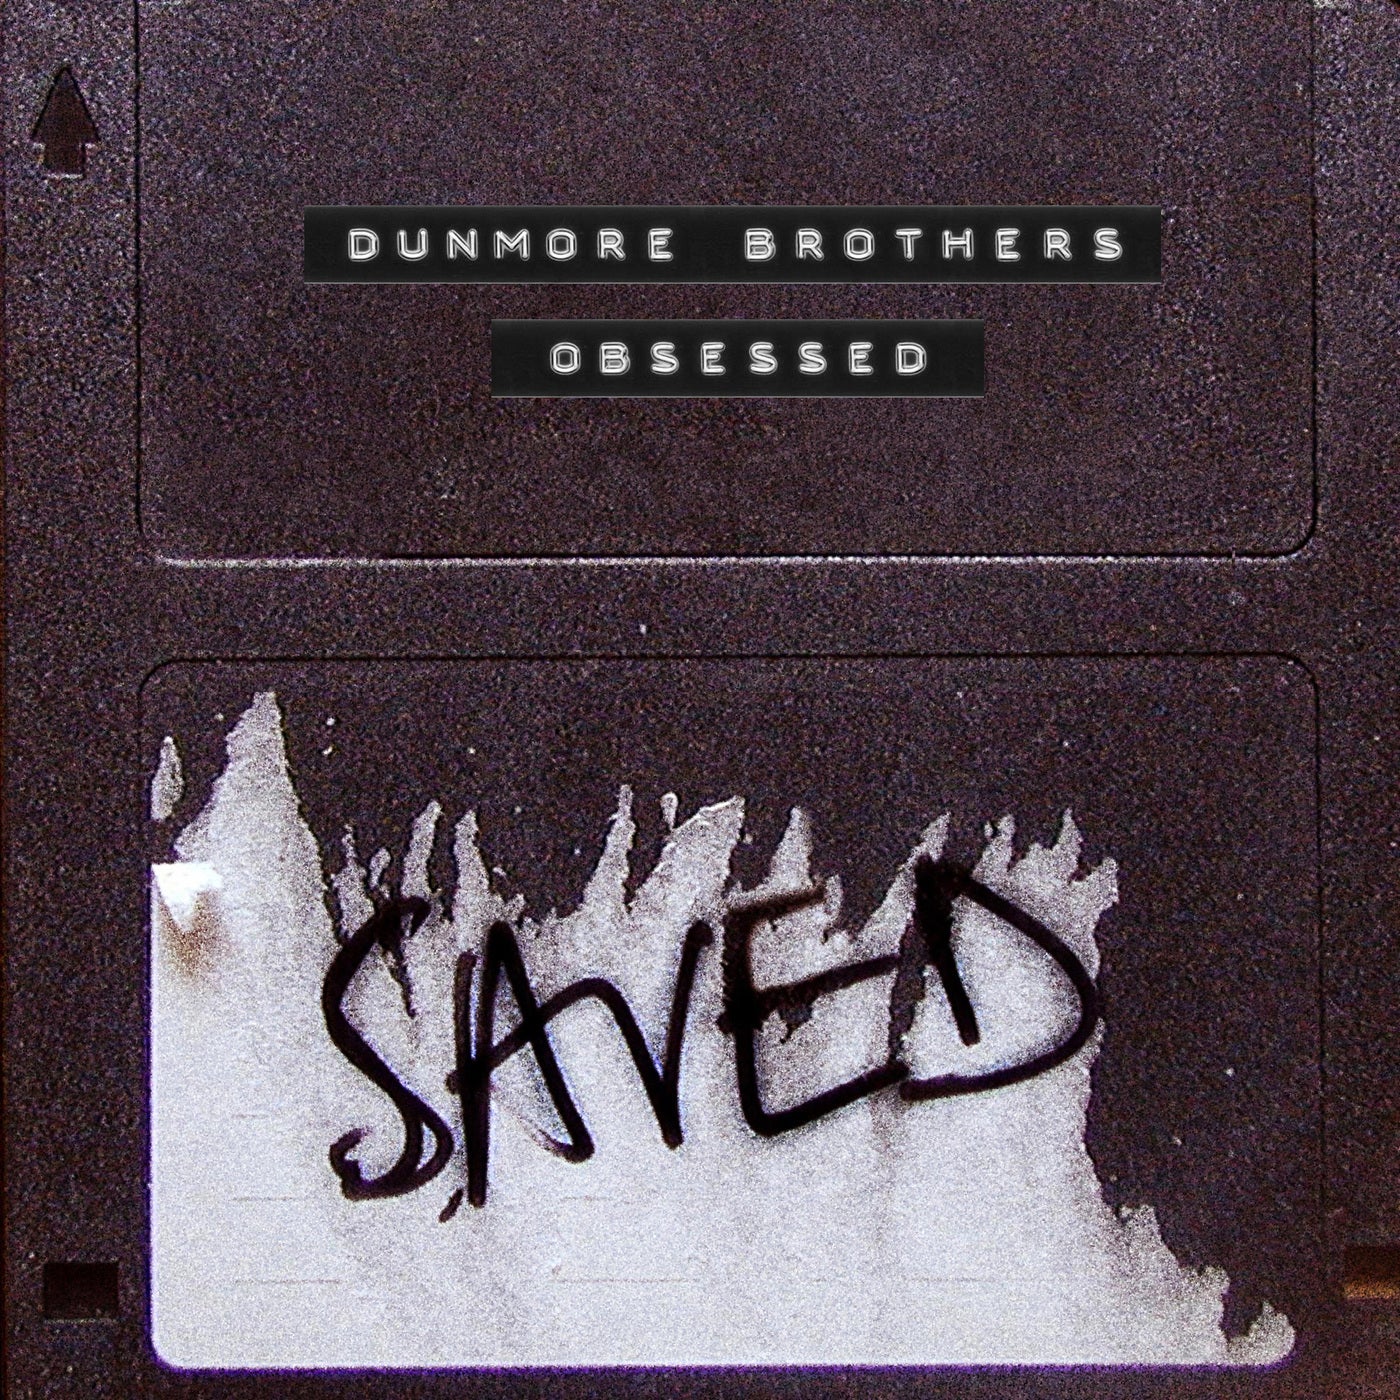 Download Dunmore Brothers - Obsessed on Electrobuzz